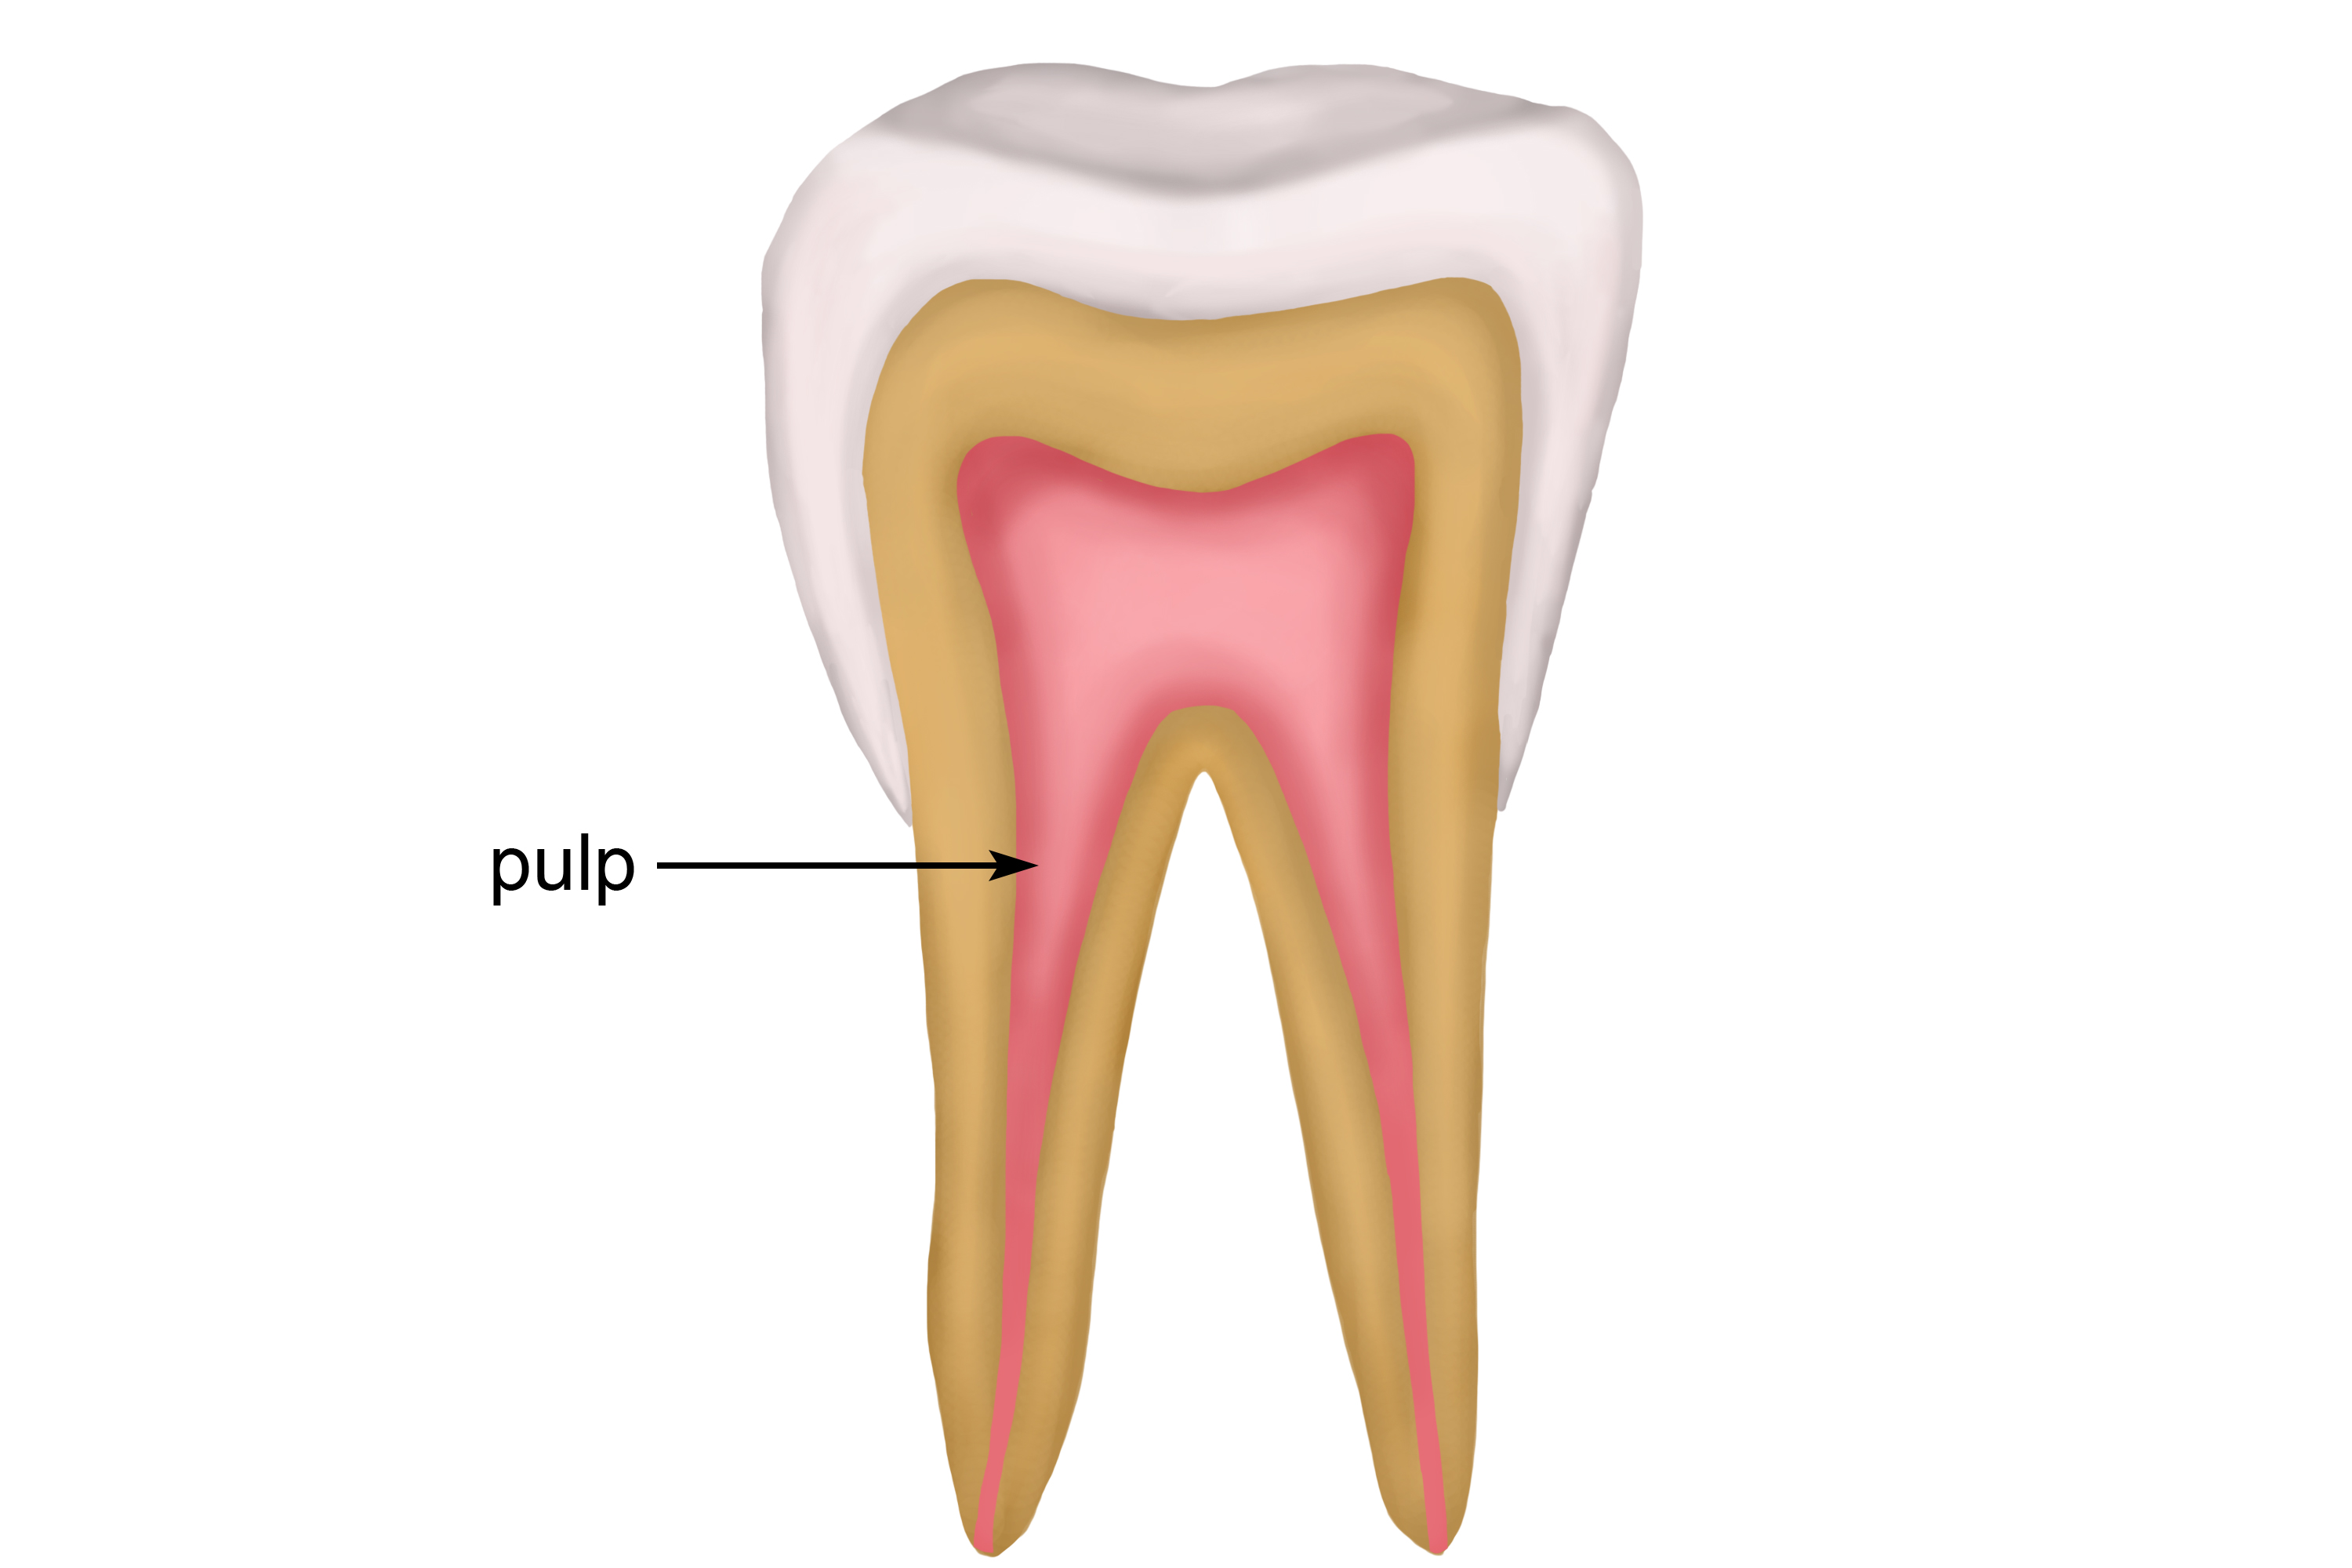 Pulp is a living tissue inside the dentine that is connected to the blood stream and nerves